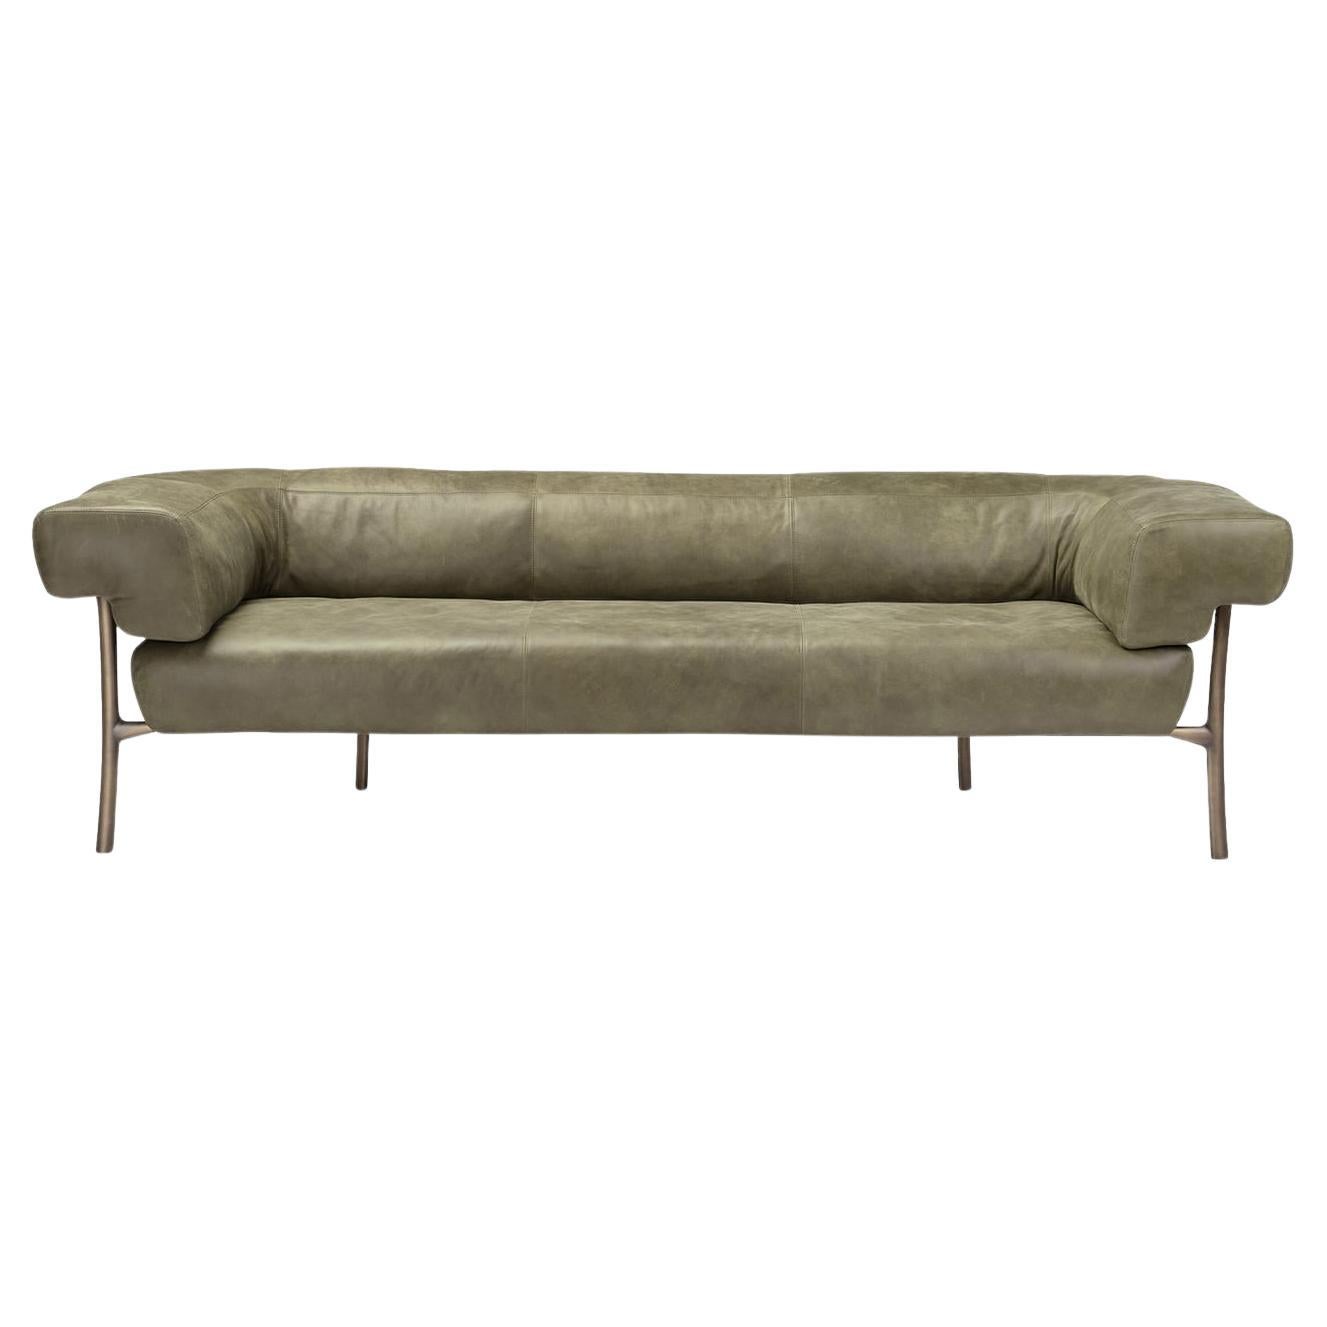 Katana Gray Leather Sofa by Paolo Rizzatto For Sale